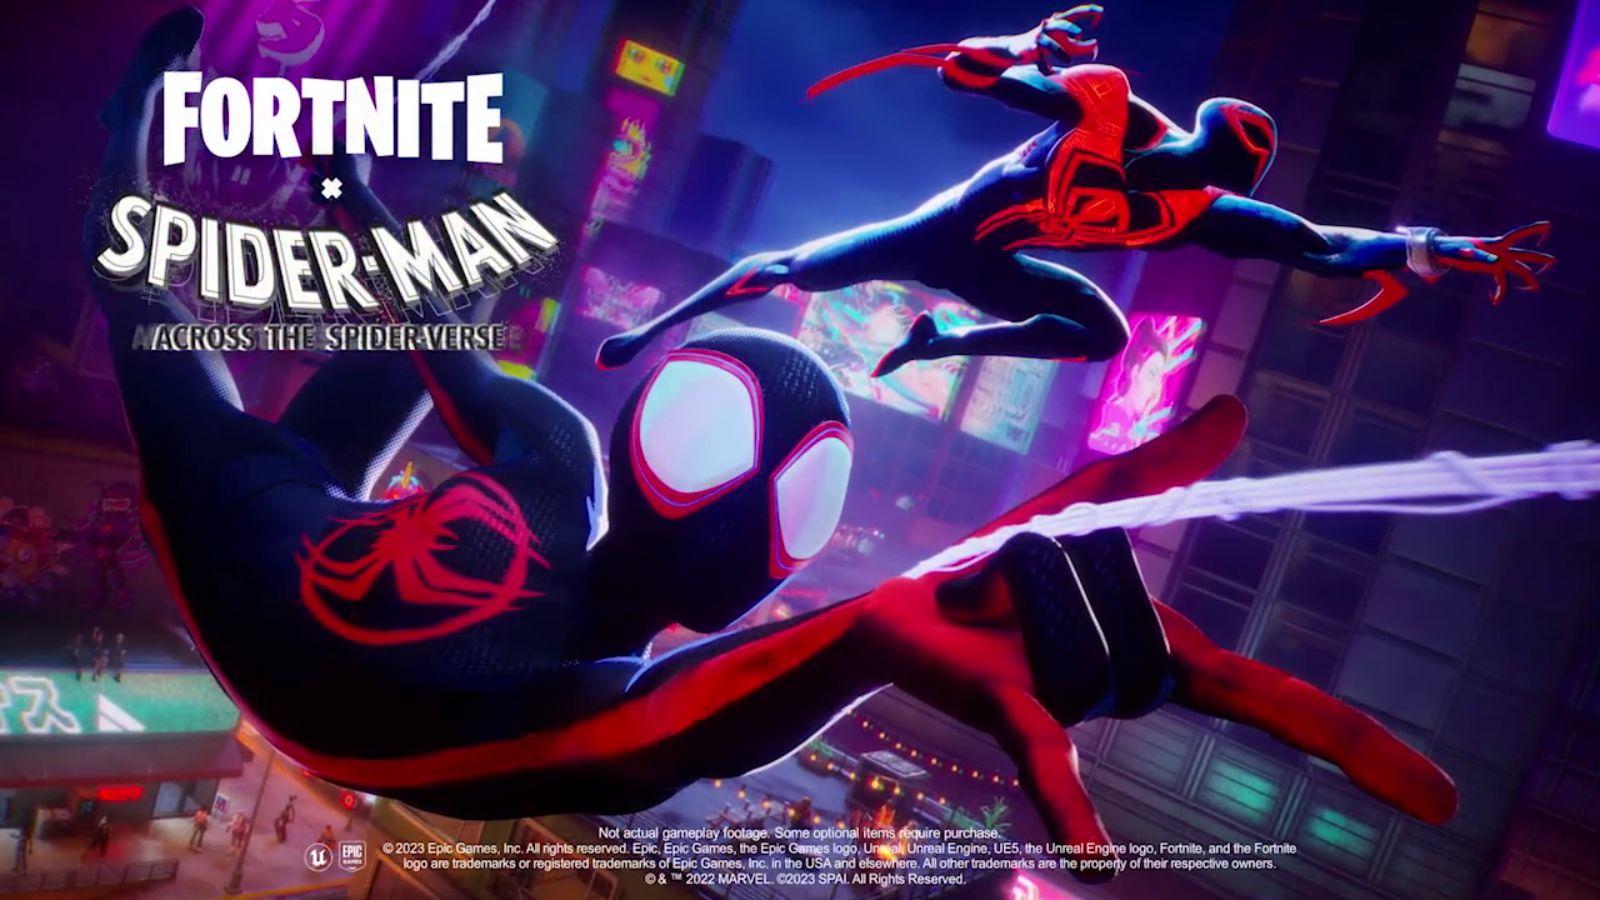 Fortnite Spider-Man Across the Spider-Verse collab loading screen